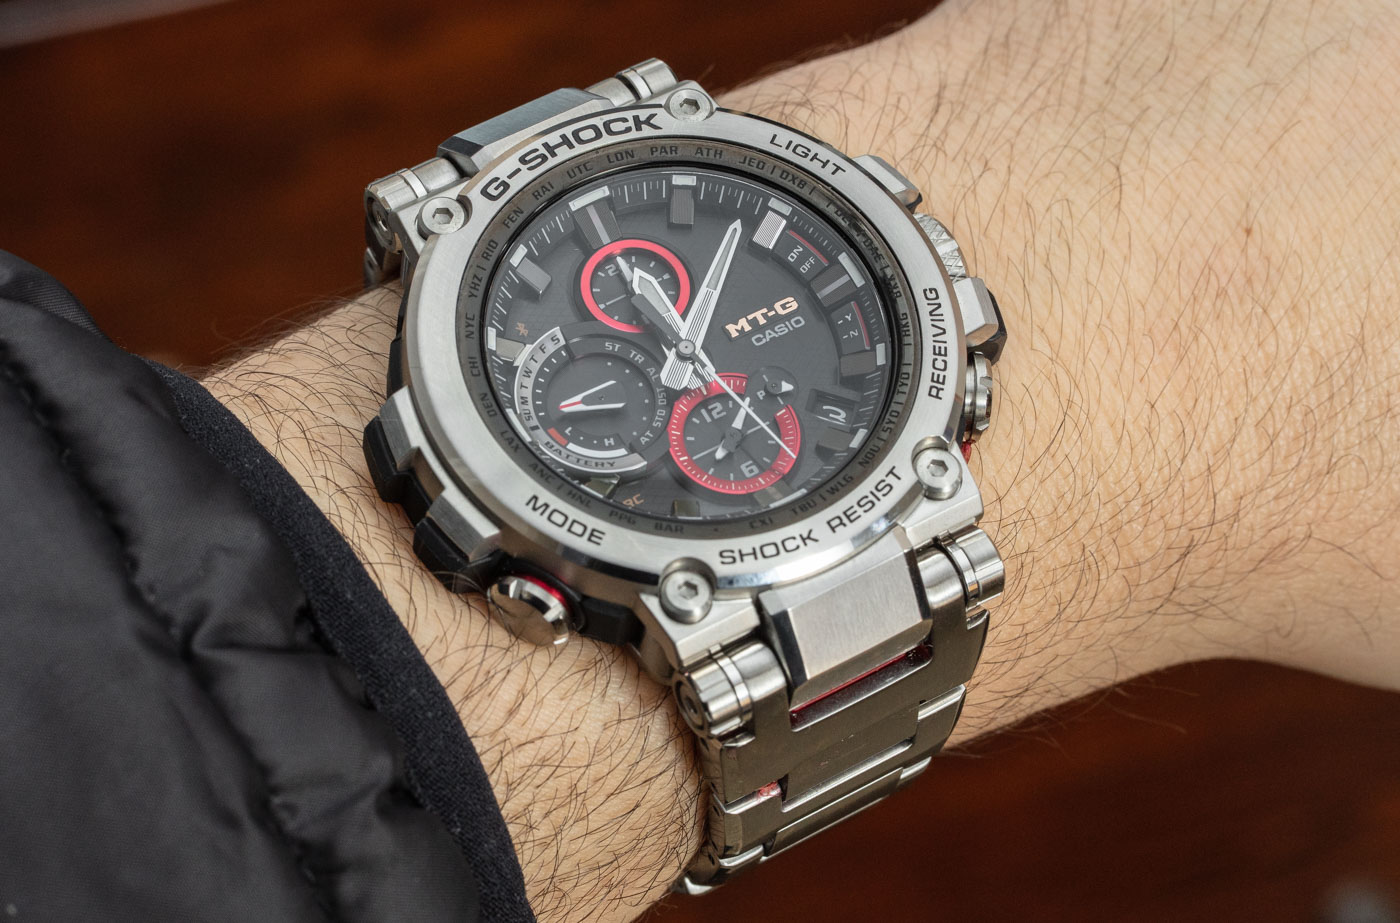 Casio G-Shock MT-G MTGB1000D-1A Watch Review: Metal With Modern 